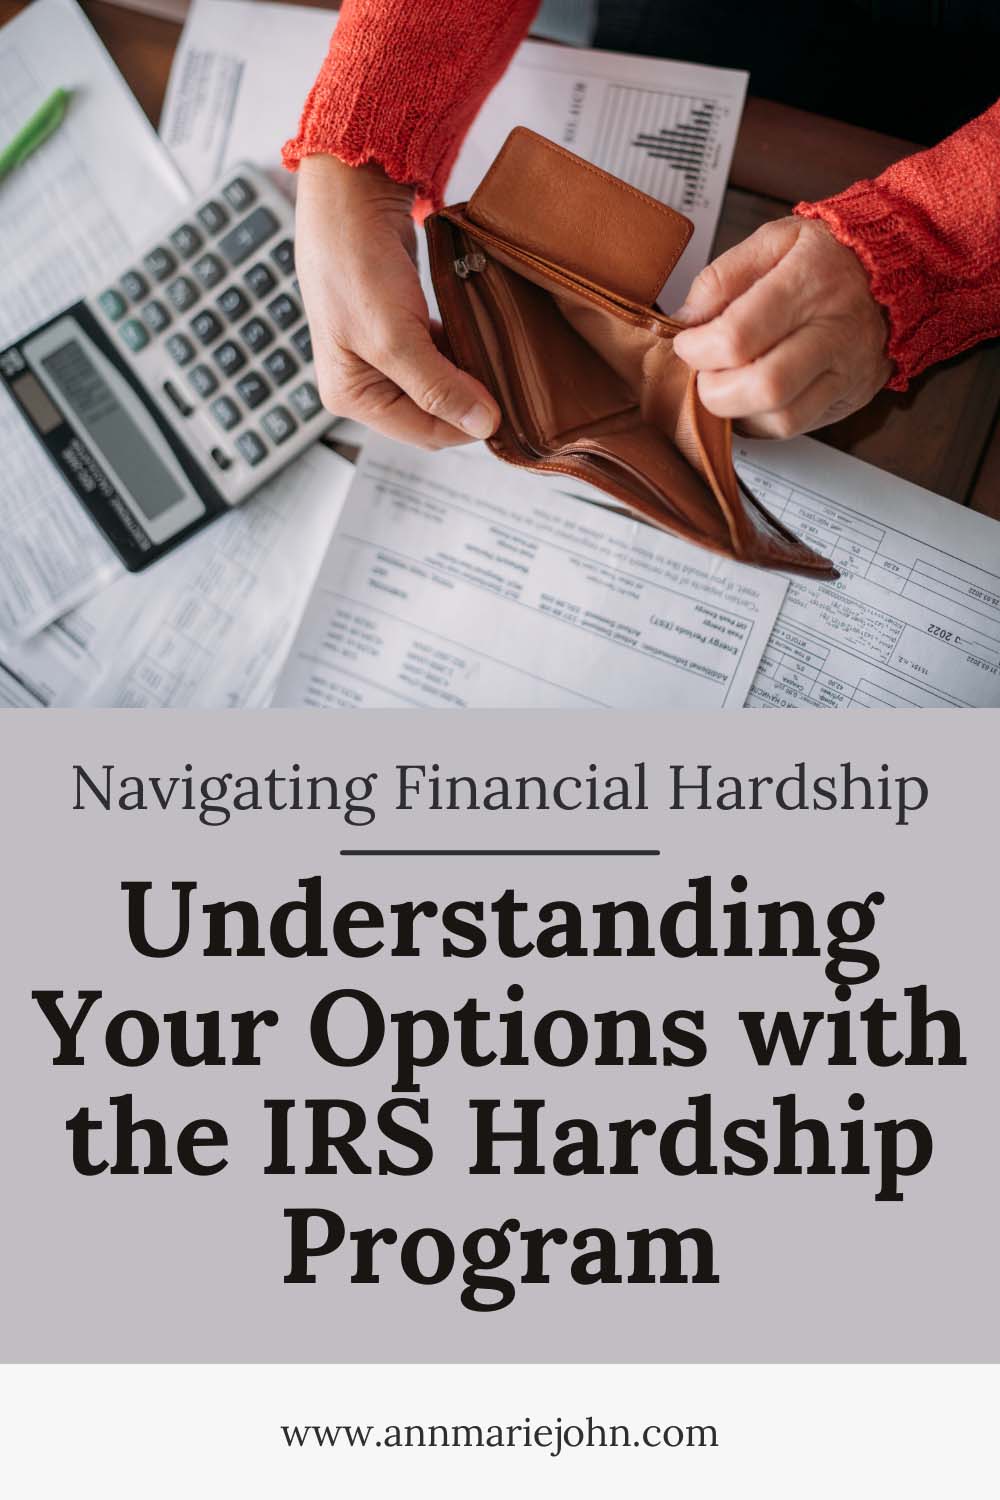 Navigating Financial Hardship: Understanding Your Options with the IRS Hardship Program